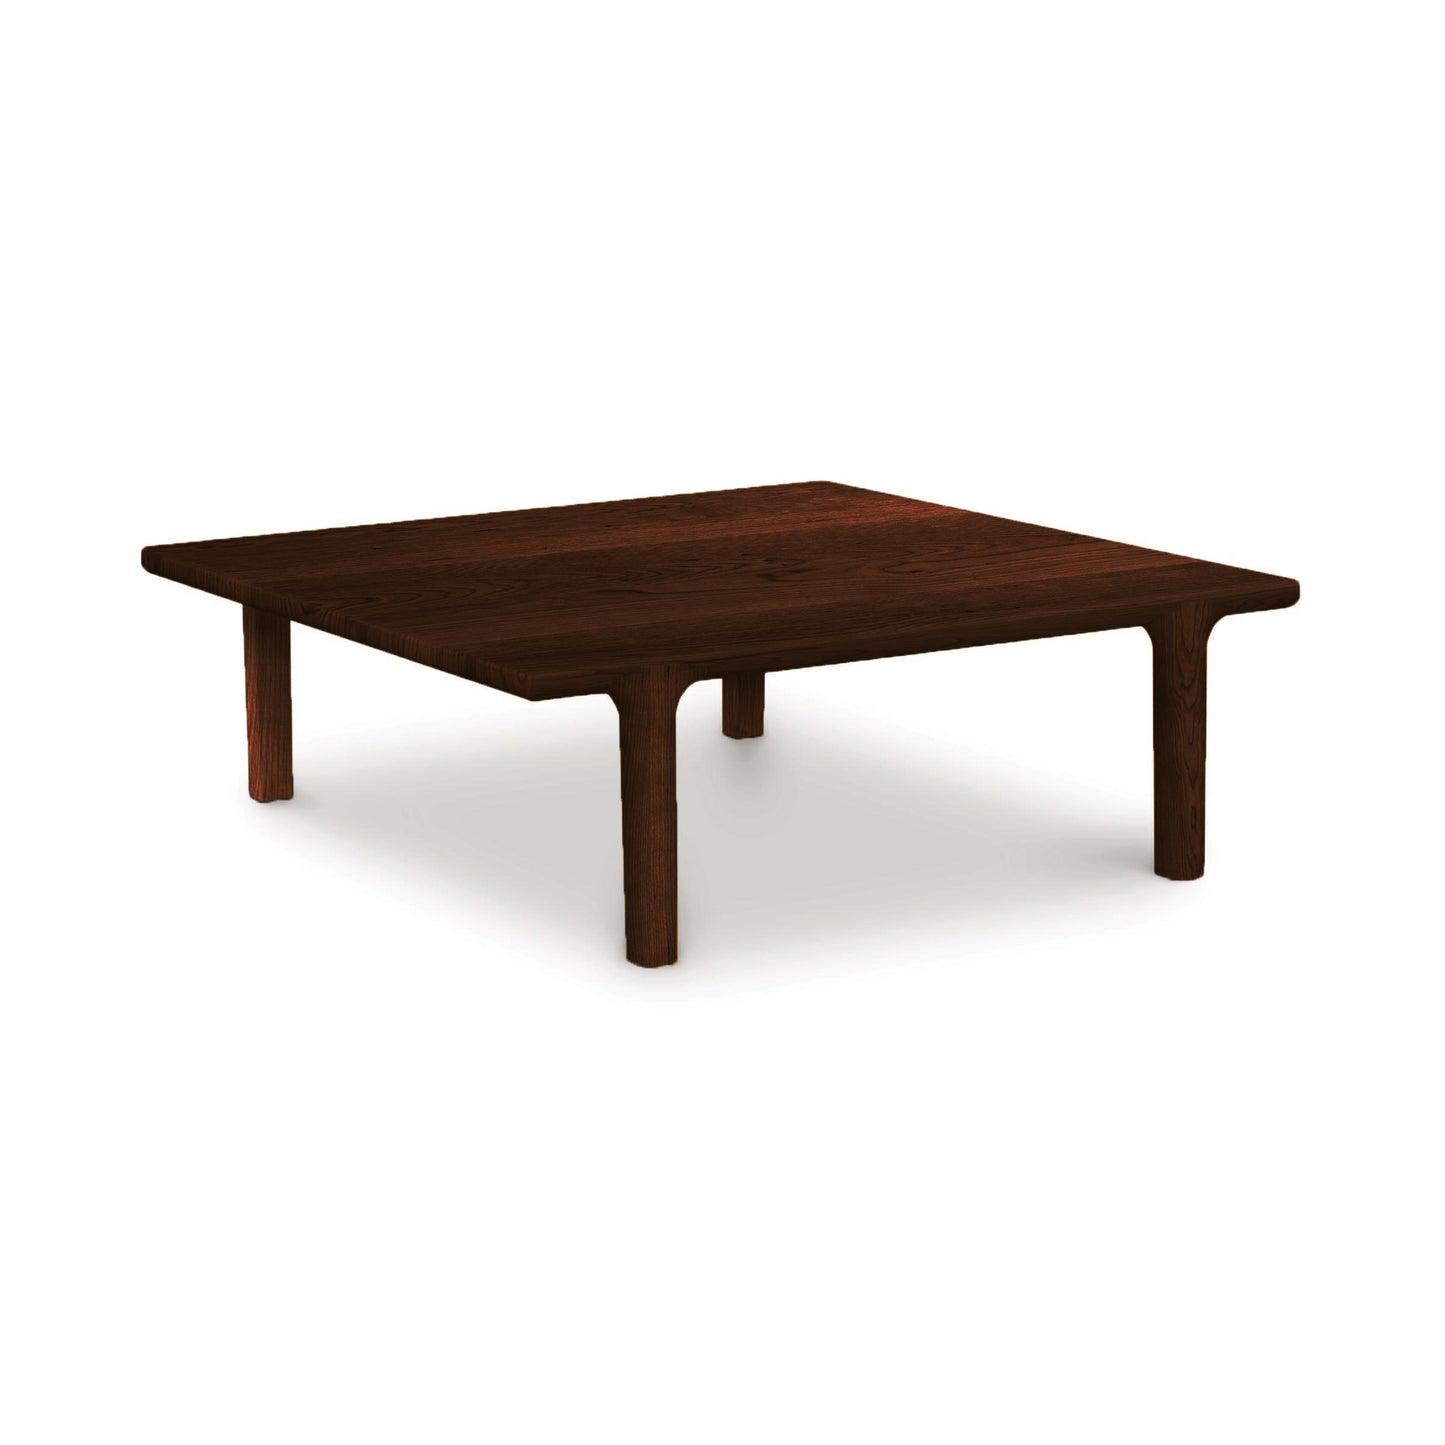 A Sierra Square Coffee Table by Copeland Furniture, perfect for seating, placed on a white background.